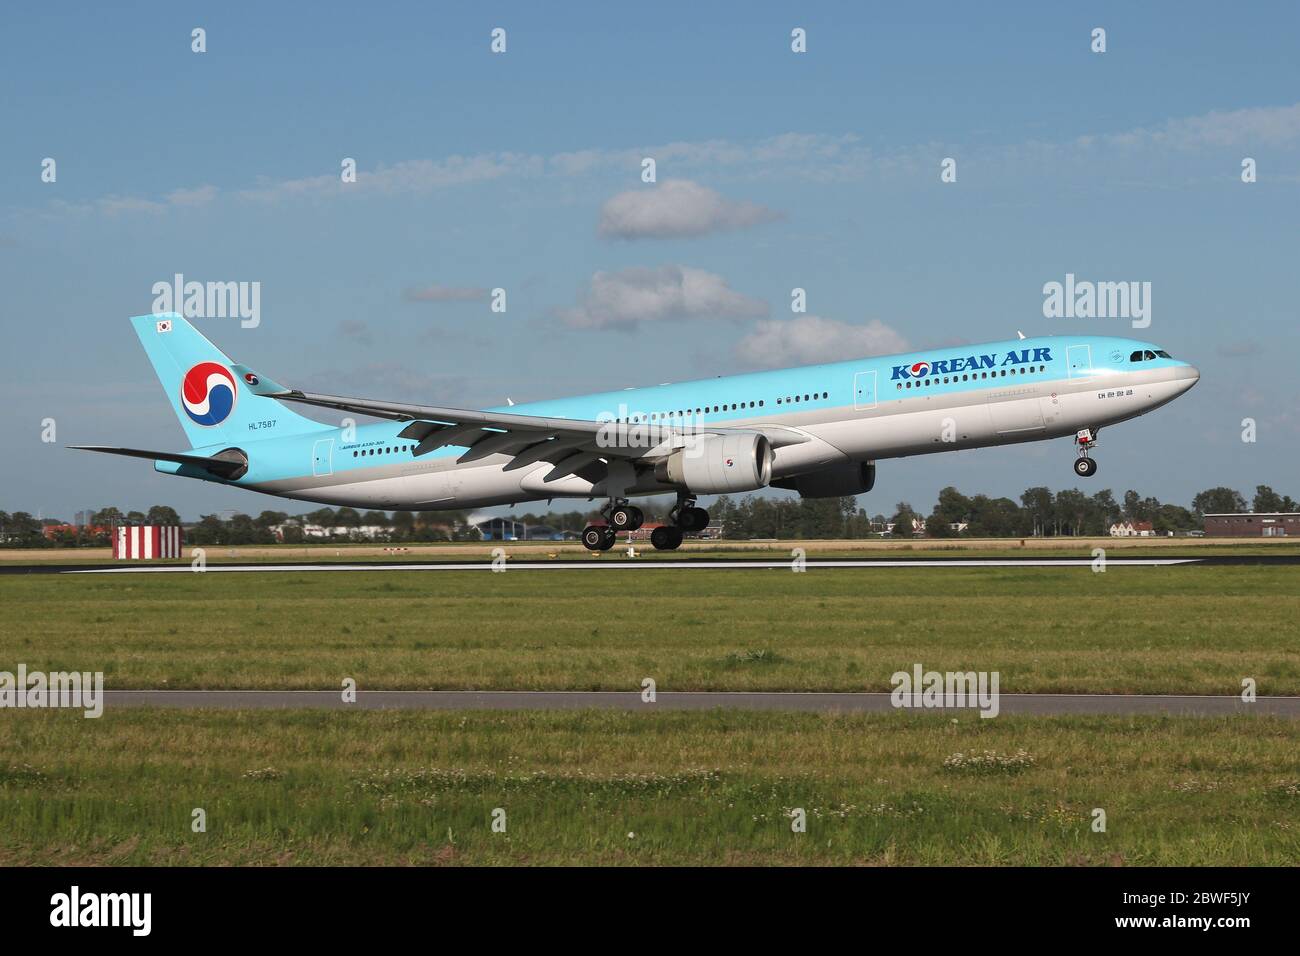 Korean Air Airbus A330-300 with registration HL7587 on short final for runway 18R (Polderbaan) of Amsterdam Airport Schiphol. Stock Photo